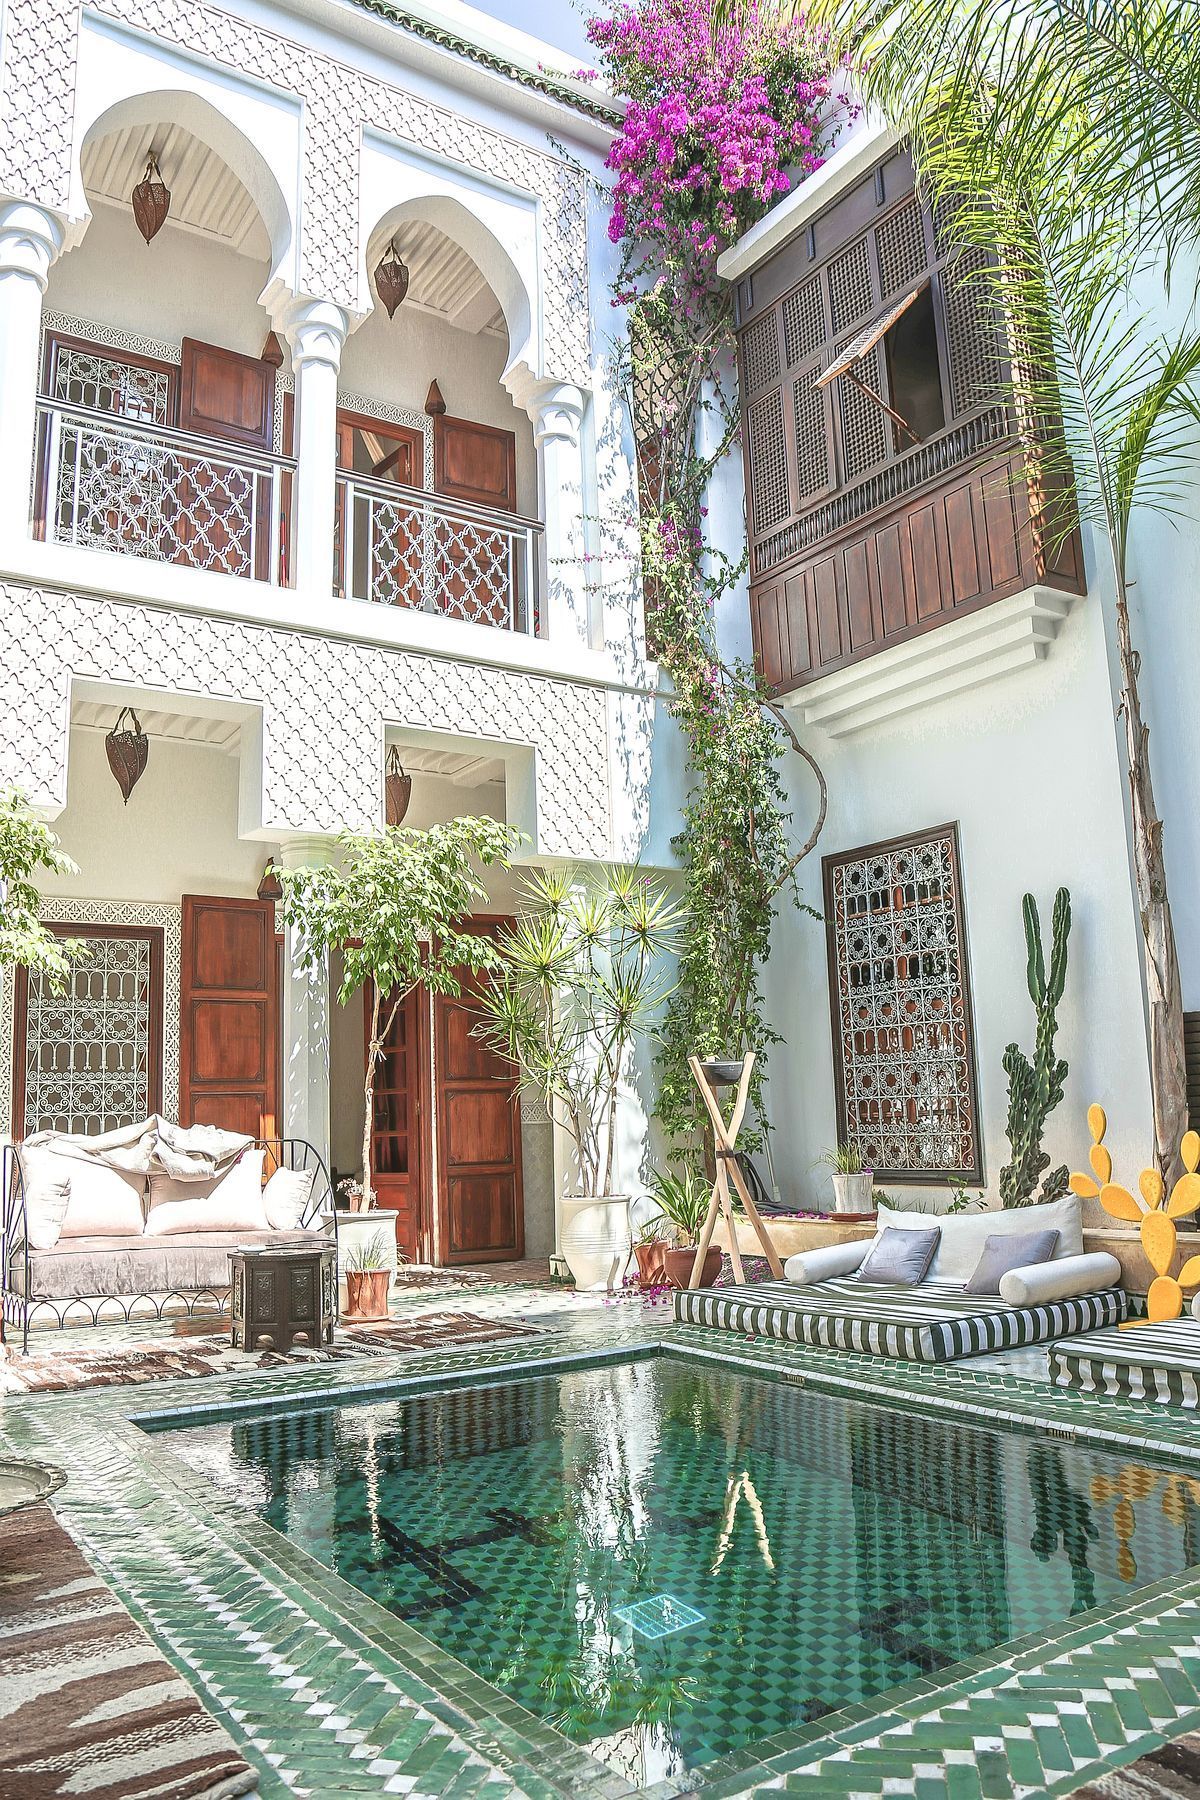 Authentic cuisine, a charming courtyard with swimming pool, and stylish, Moroccan inspired interiors make Riad Yasmine one of